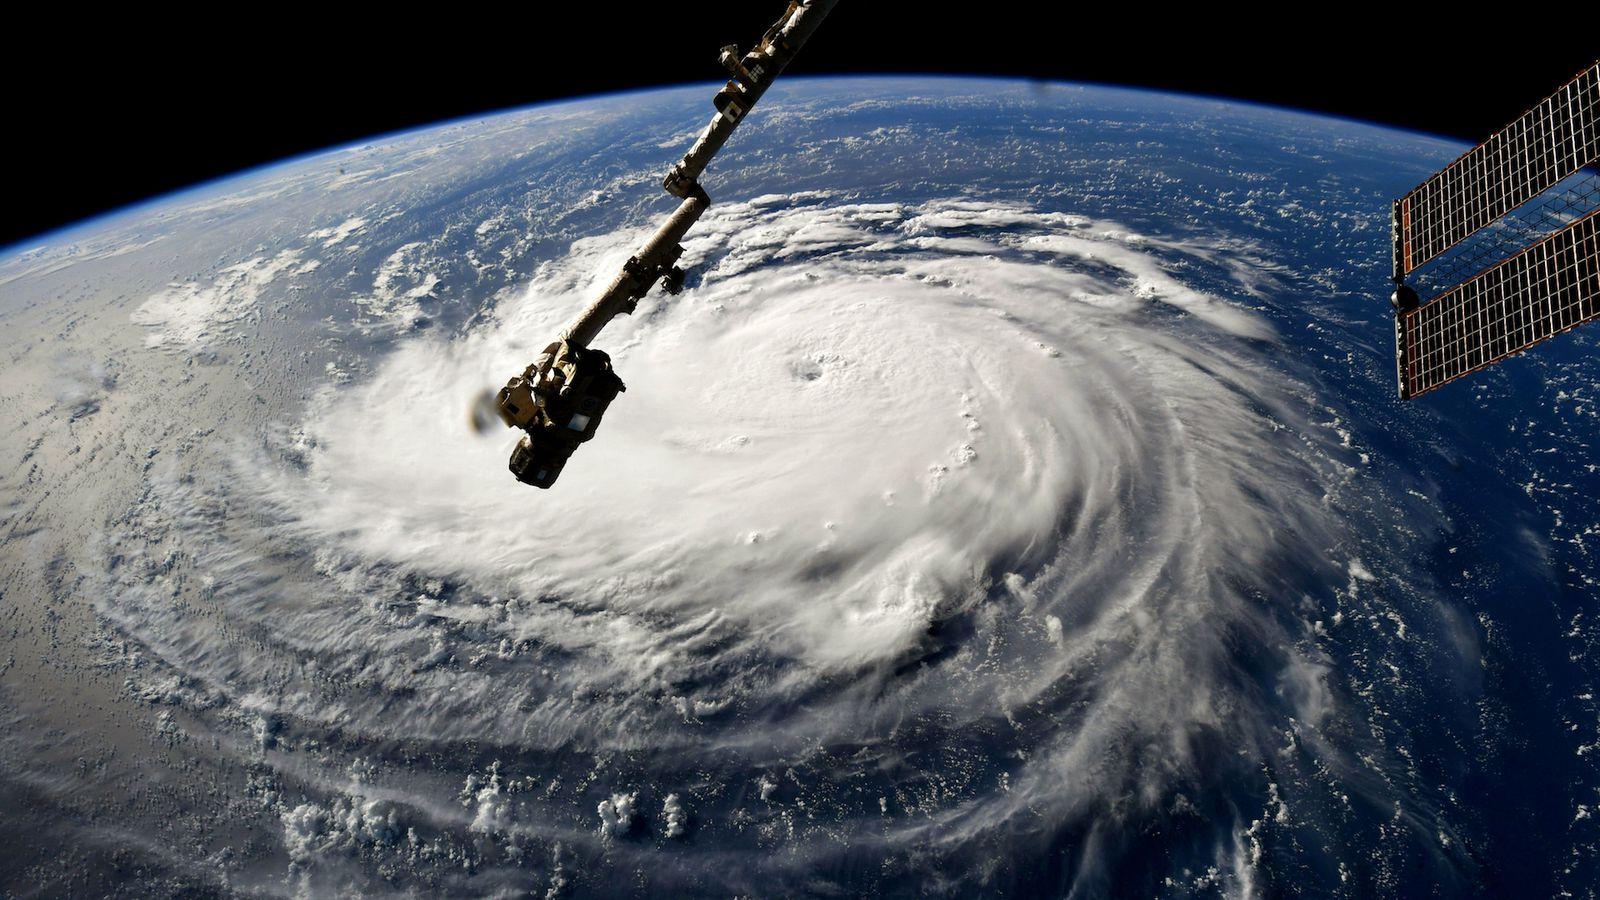 Go deeper: Hurricane Florence is a storm threat unlike any other